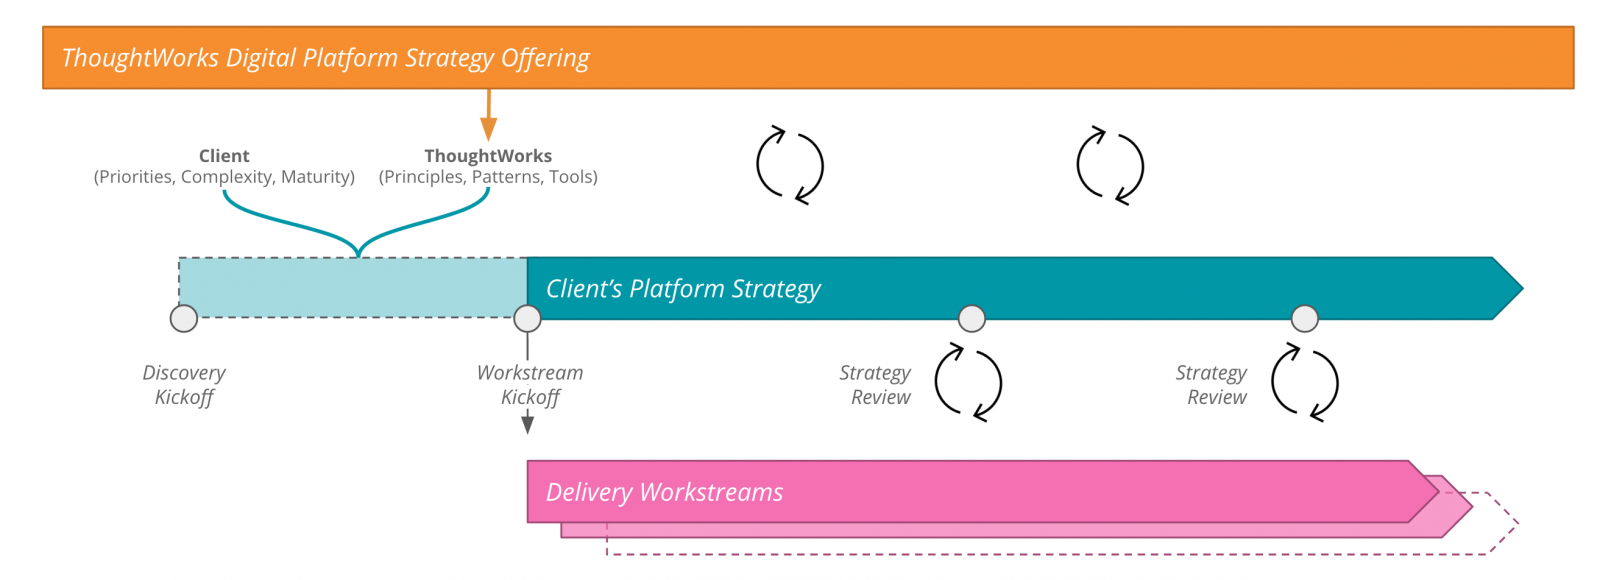 The Art of Platform Thinking | Thoughtworks